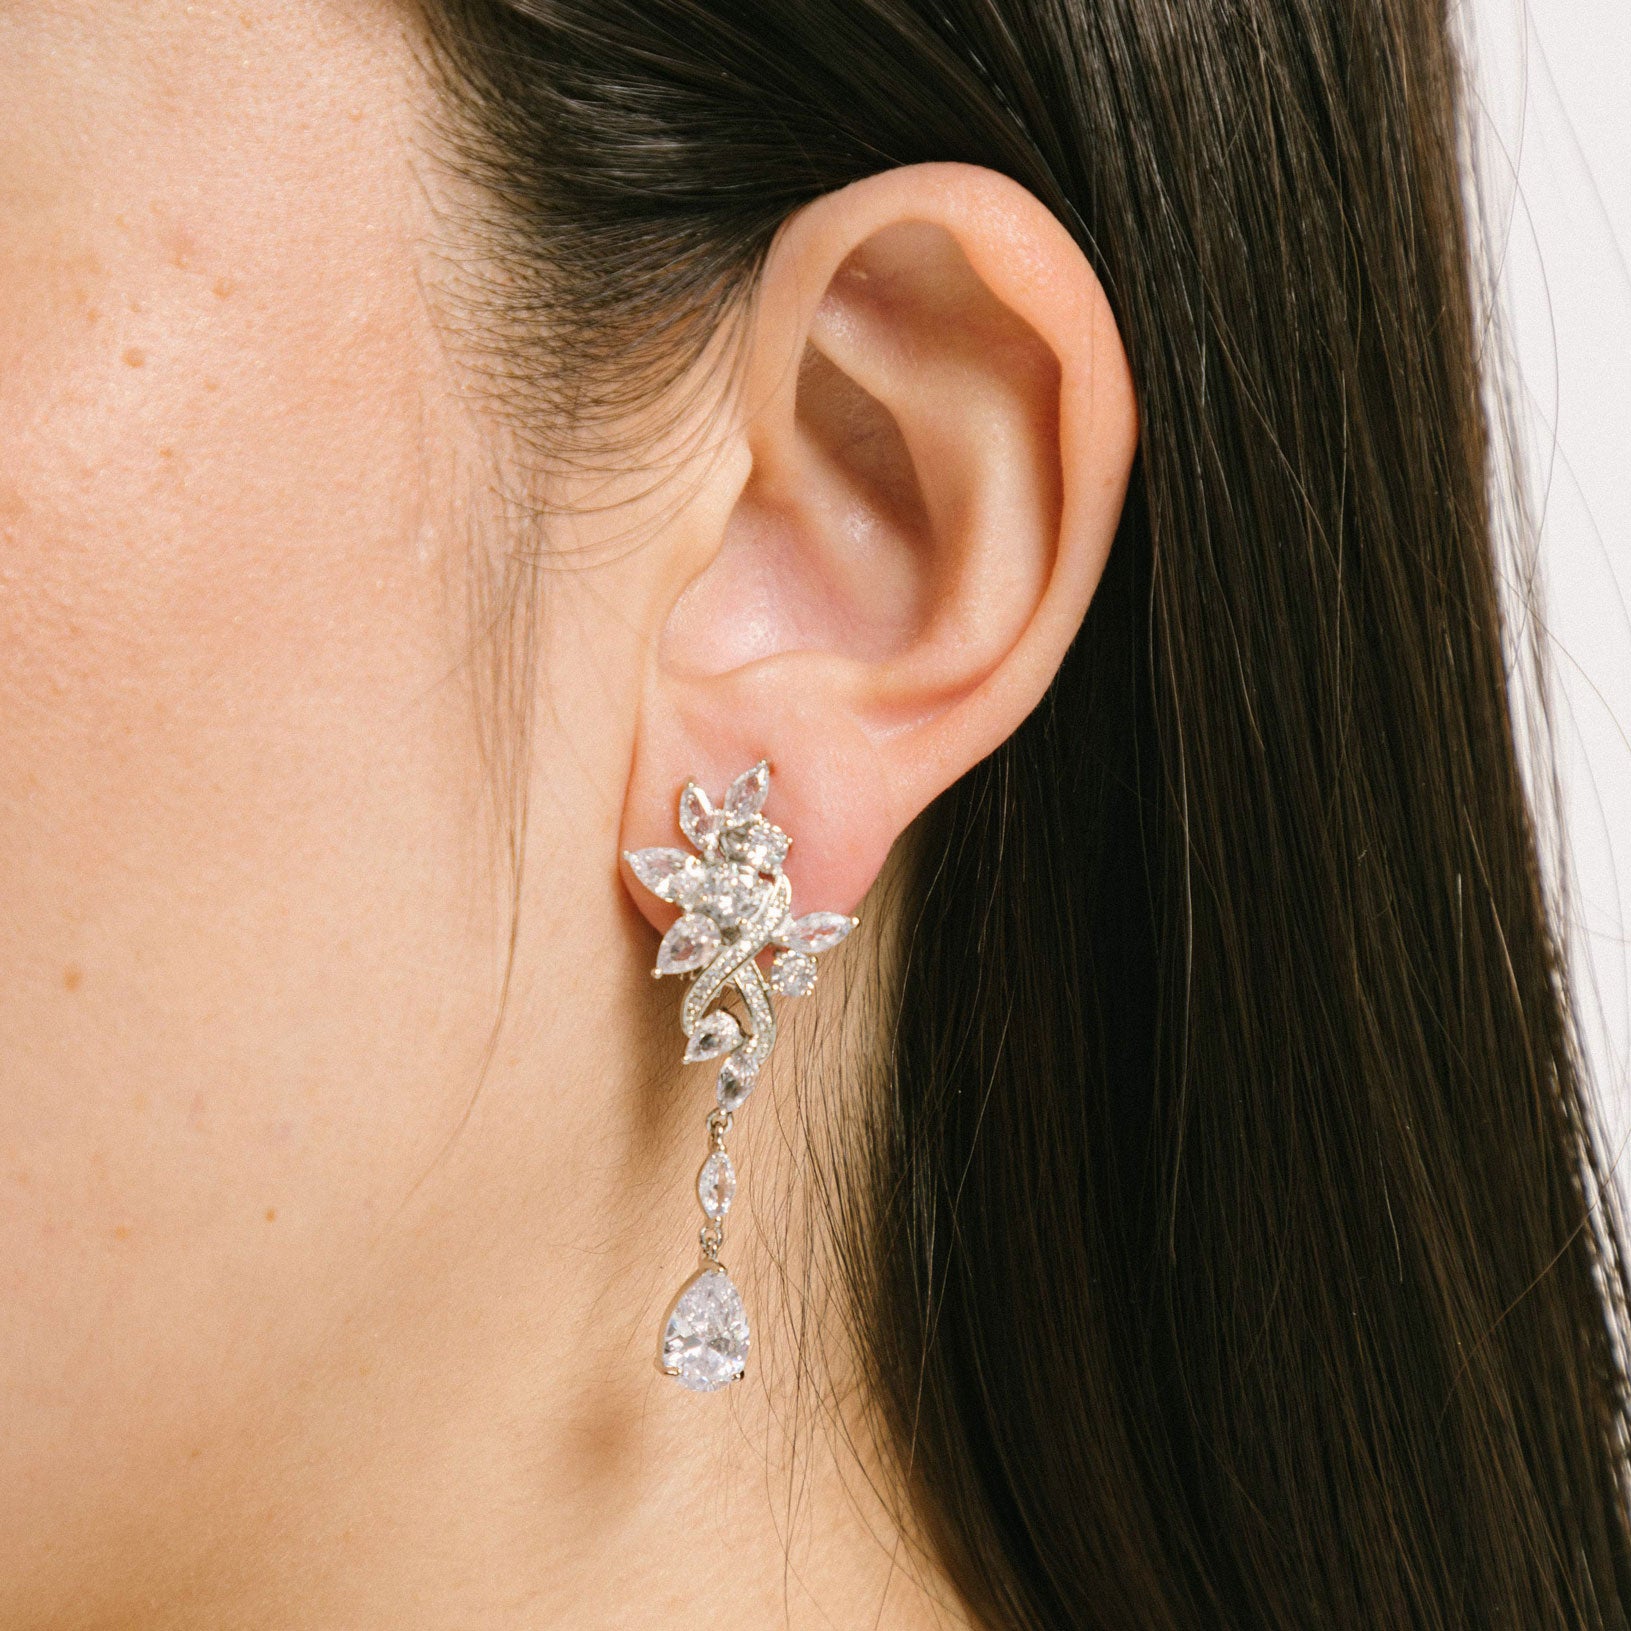 A model wearing the Evelyn Clip-On Earrings offer a secure fit for all ear types, ranging from thick/large ears to small/thin ears. With an average comfortable wear duration of 8-12 hours, these earrings have silver plated copper alloy components and feature a cubic zirconia setting. Additionally, the rubber padding is removable. Please note that this item is one pair.